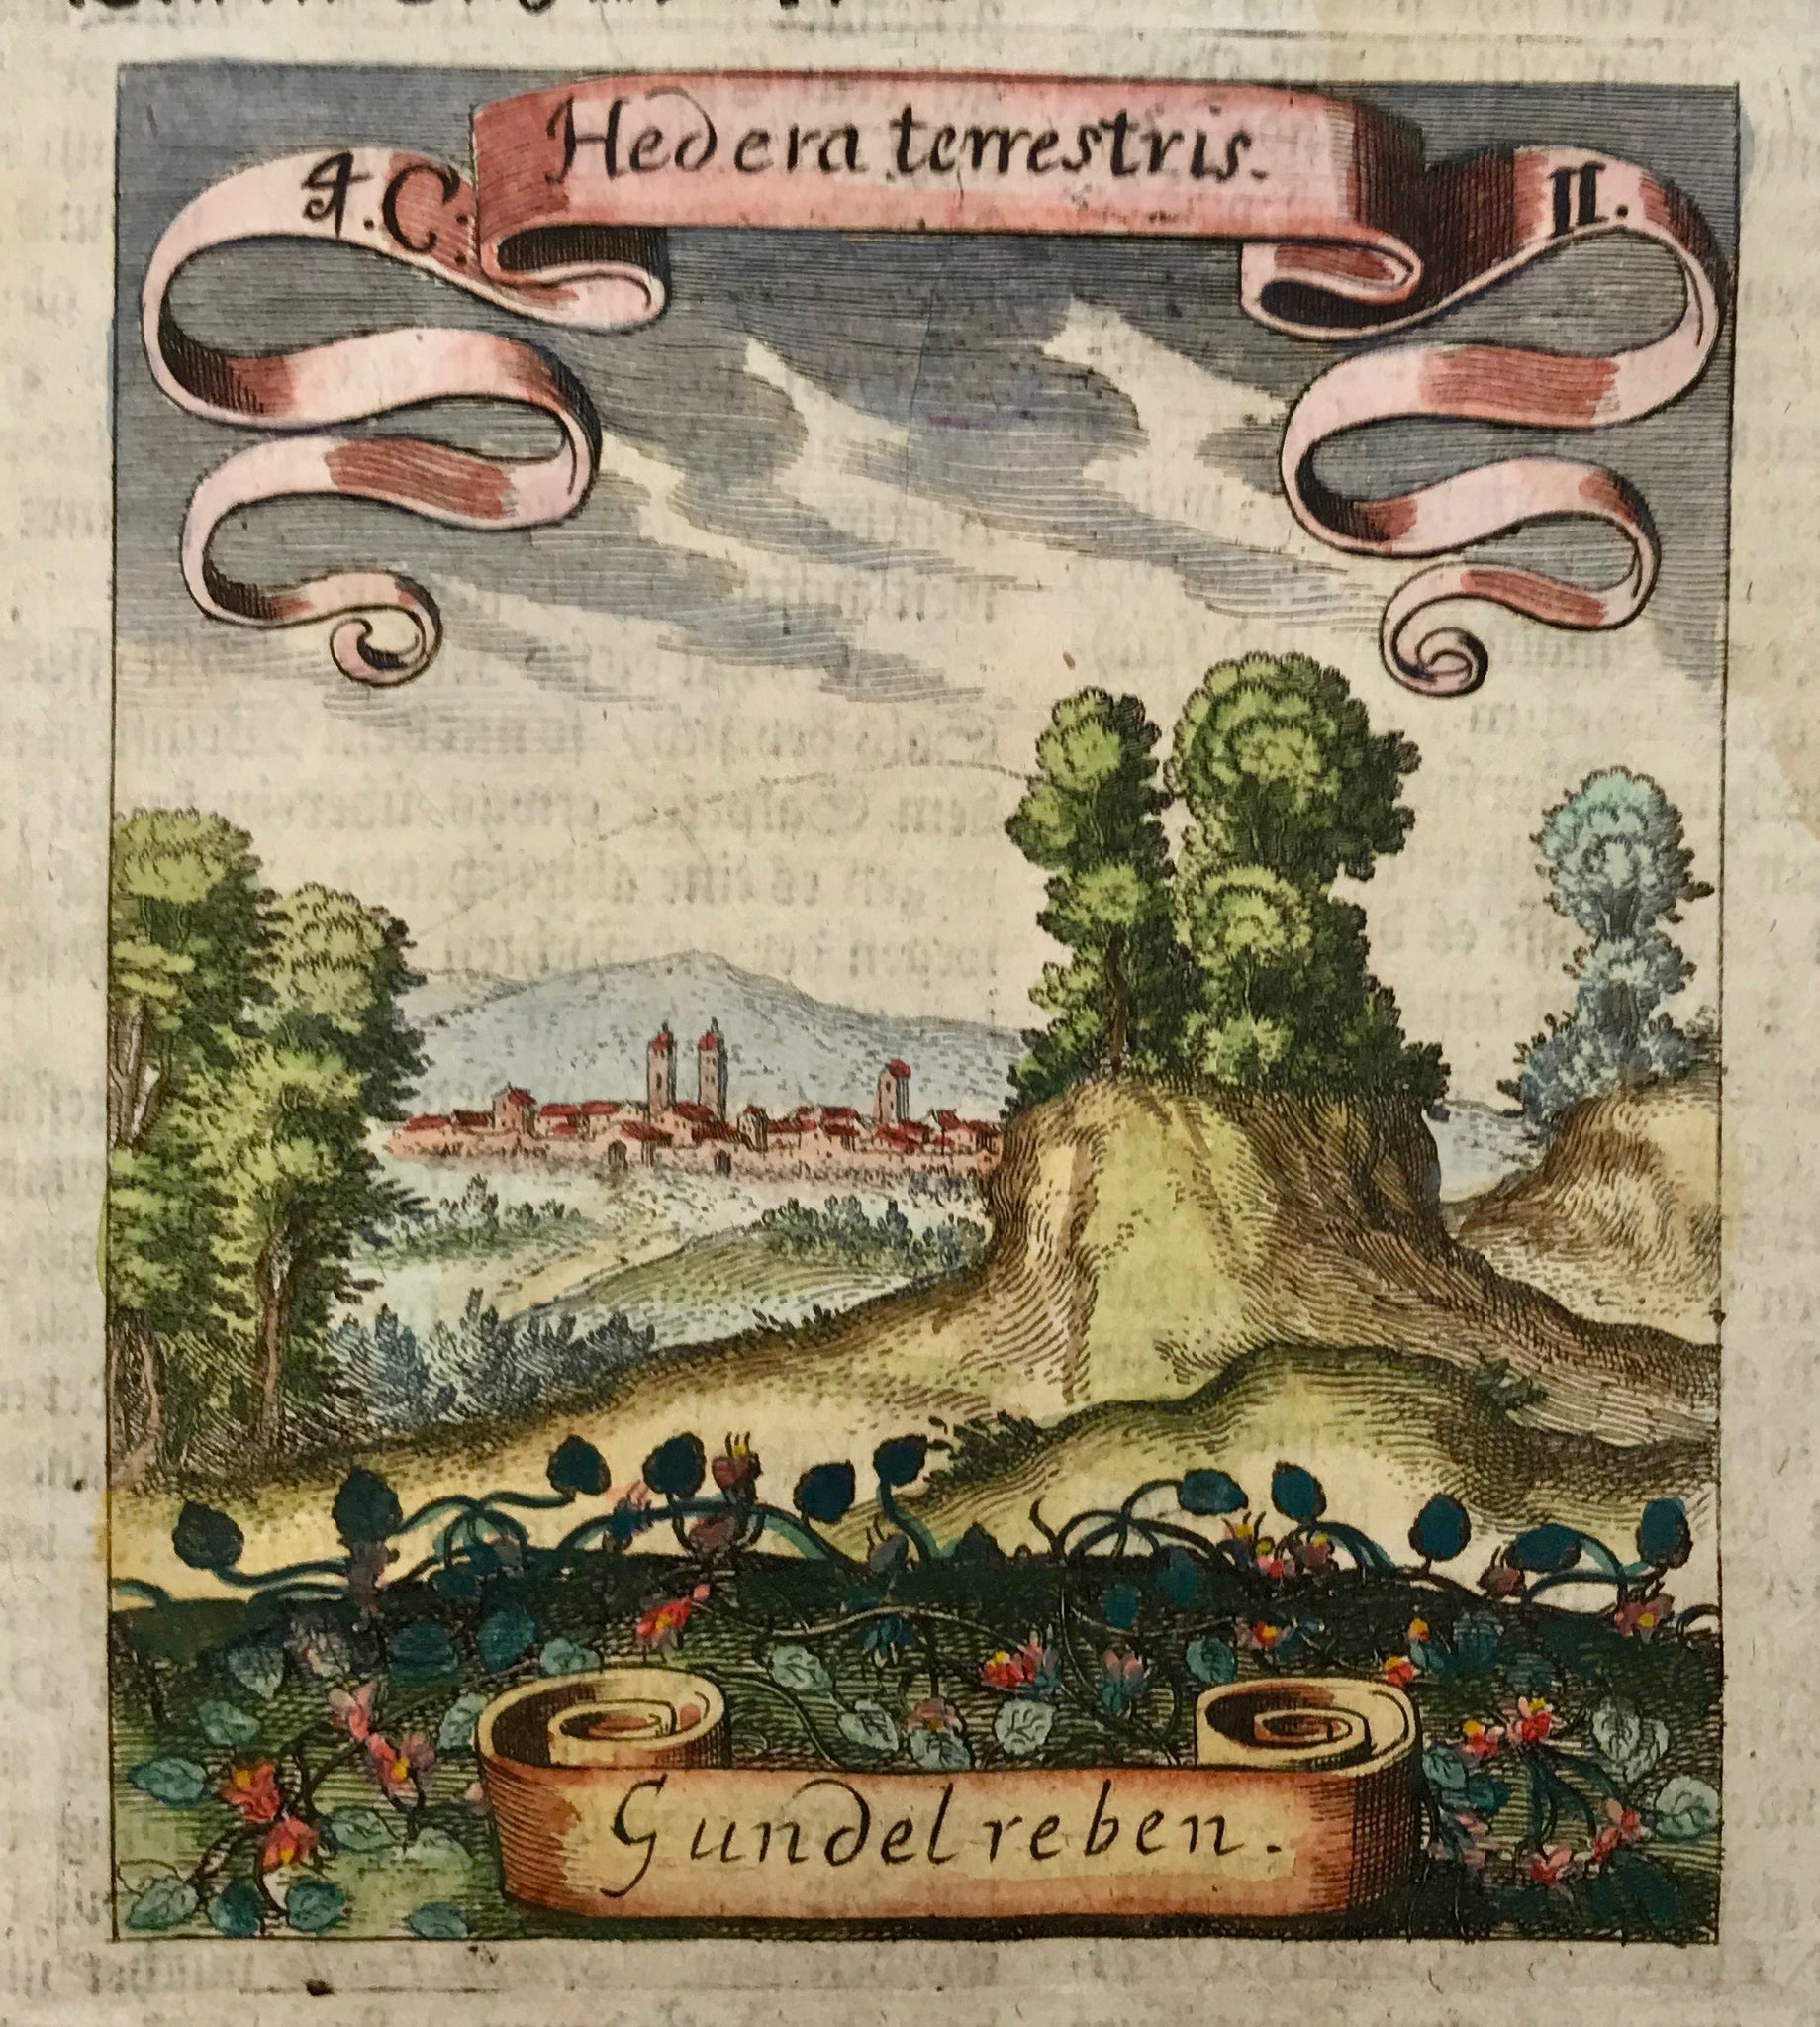 Hedera terrestris-Gundelreben  Botanical Prints by Matthaeus Merian Matthaeus Merian (1593 Basel - Bad Schwalbach 1650), famous for his "Topographies" and his "Theatrum Europeum" was also a very distinguished engraver and publisher of many other varieties of books and prints.